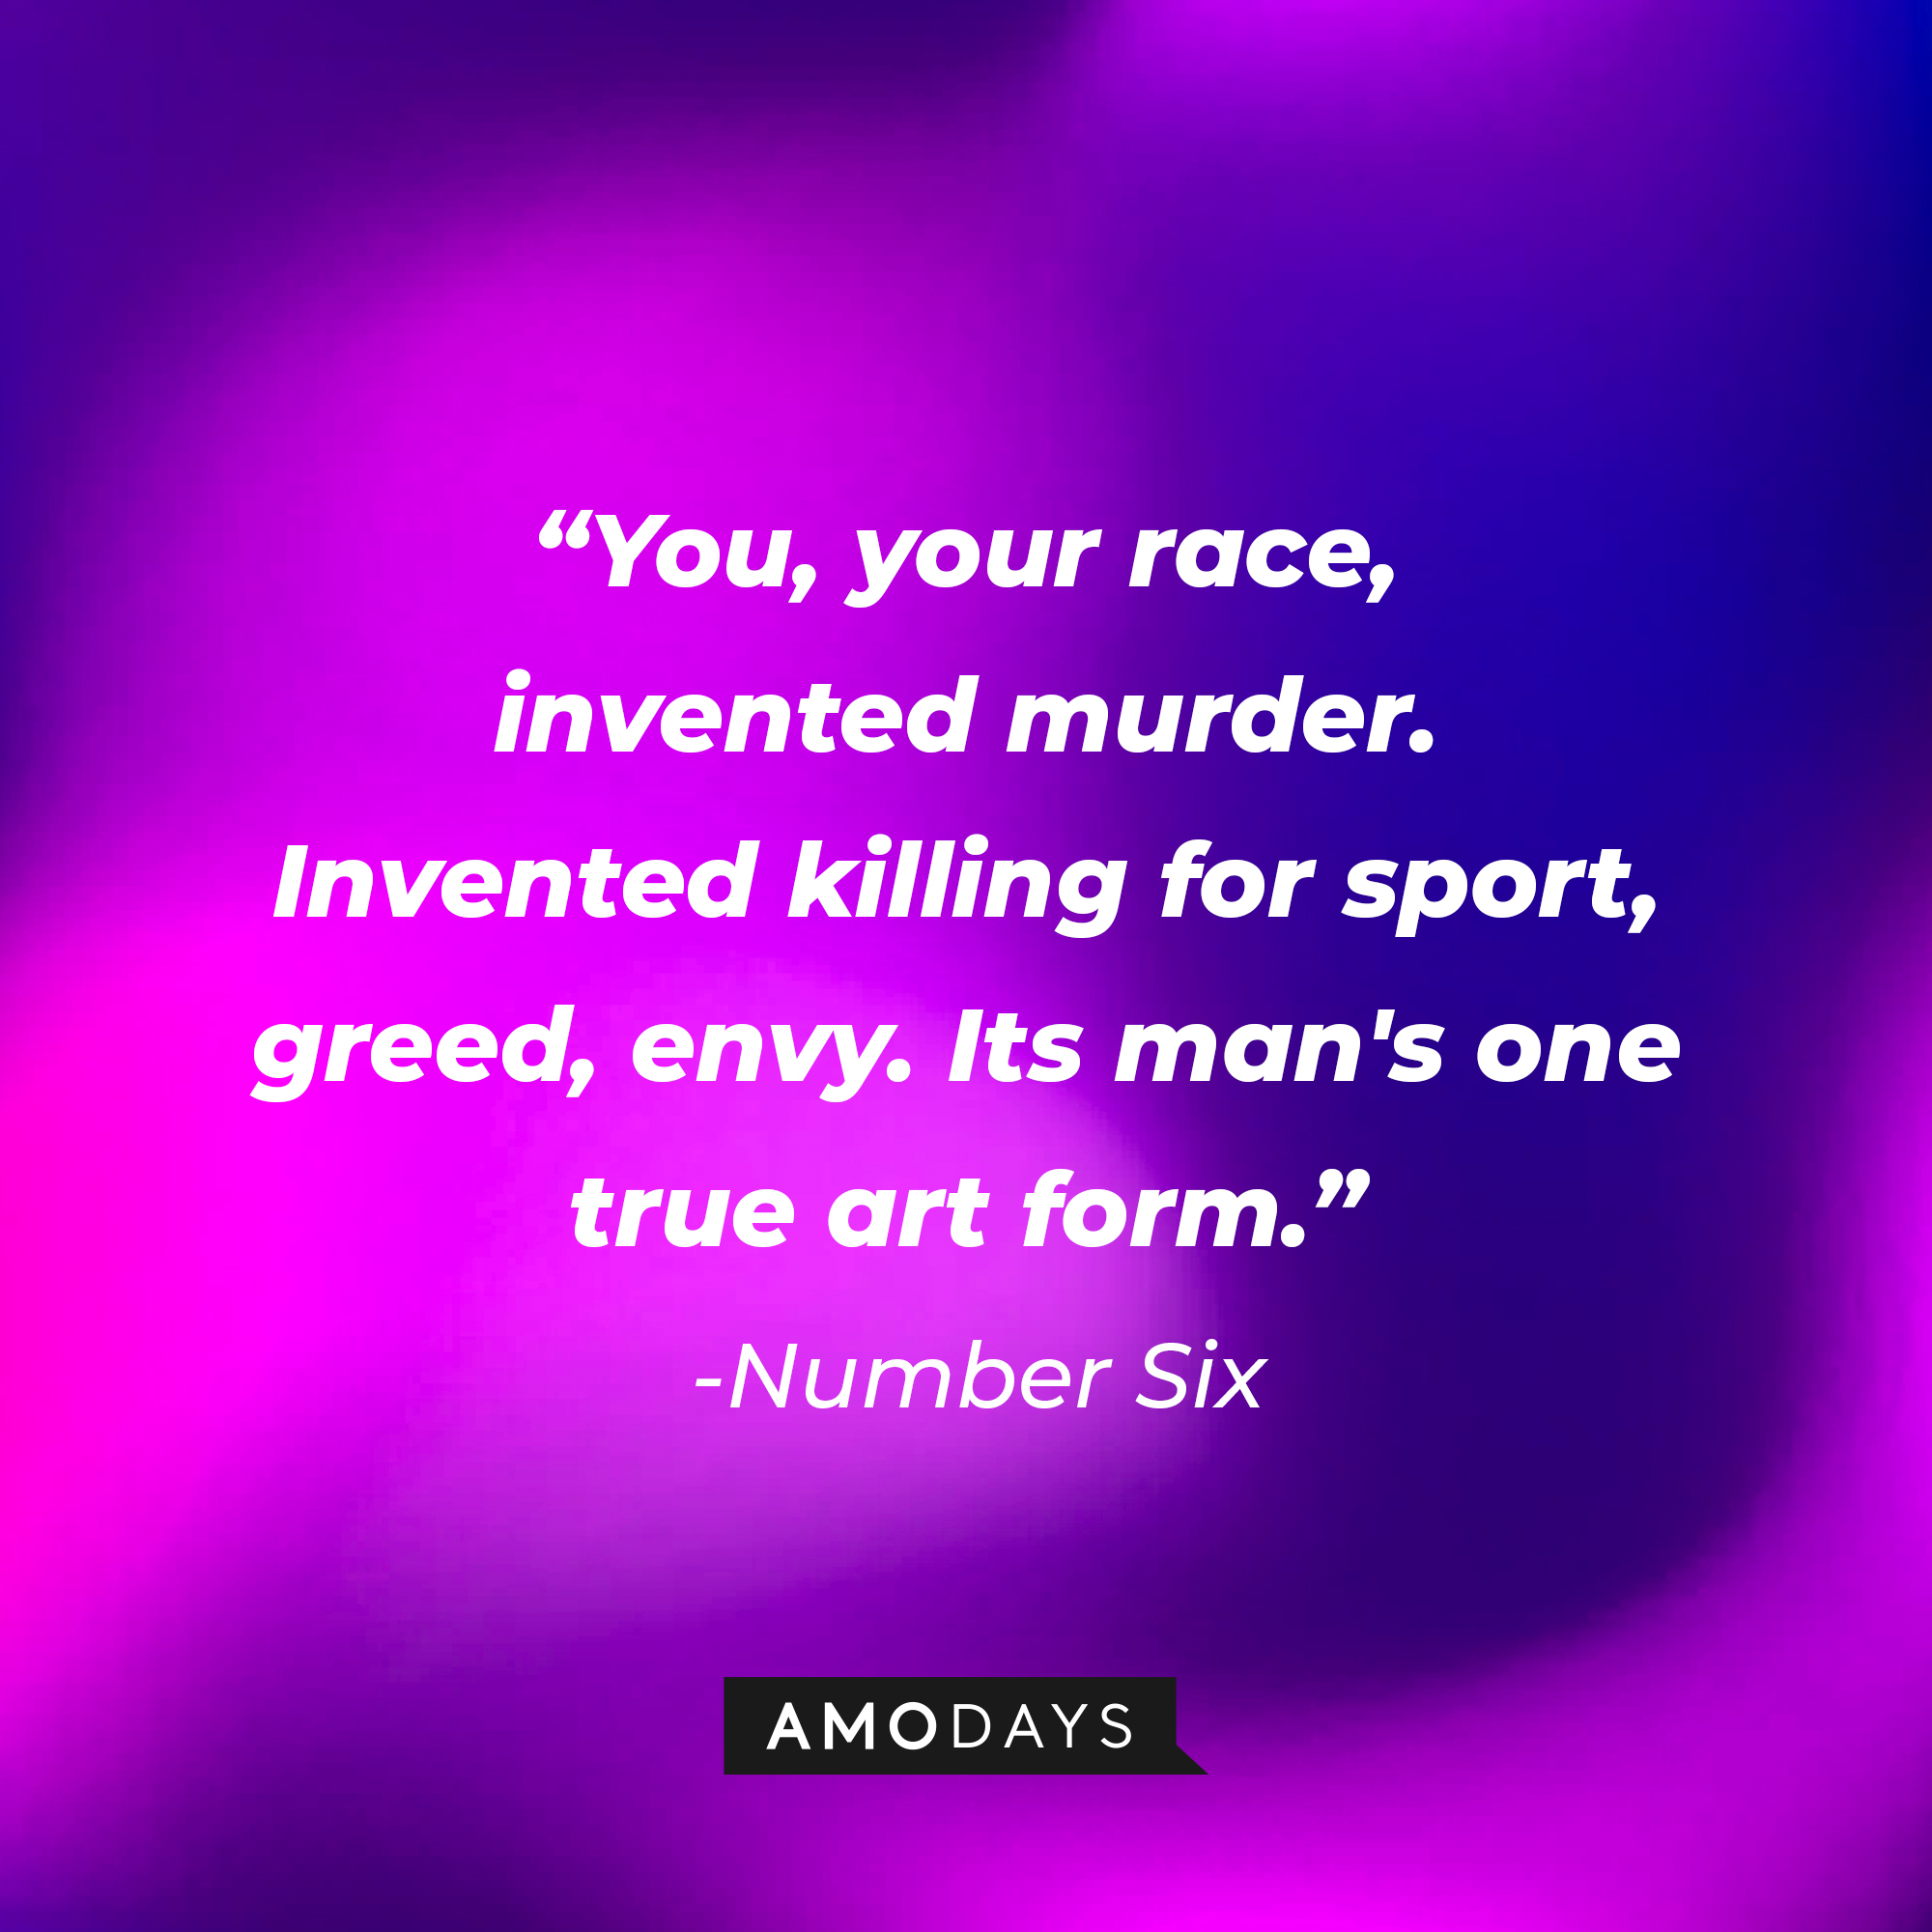 Number six’s quote: “You, your race, invented murder. Invented killing for sport, greed, envy. Its man's one true art form.” | Source: AmoDays